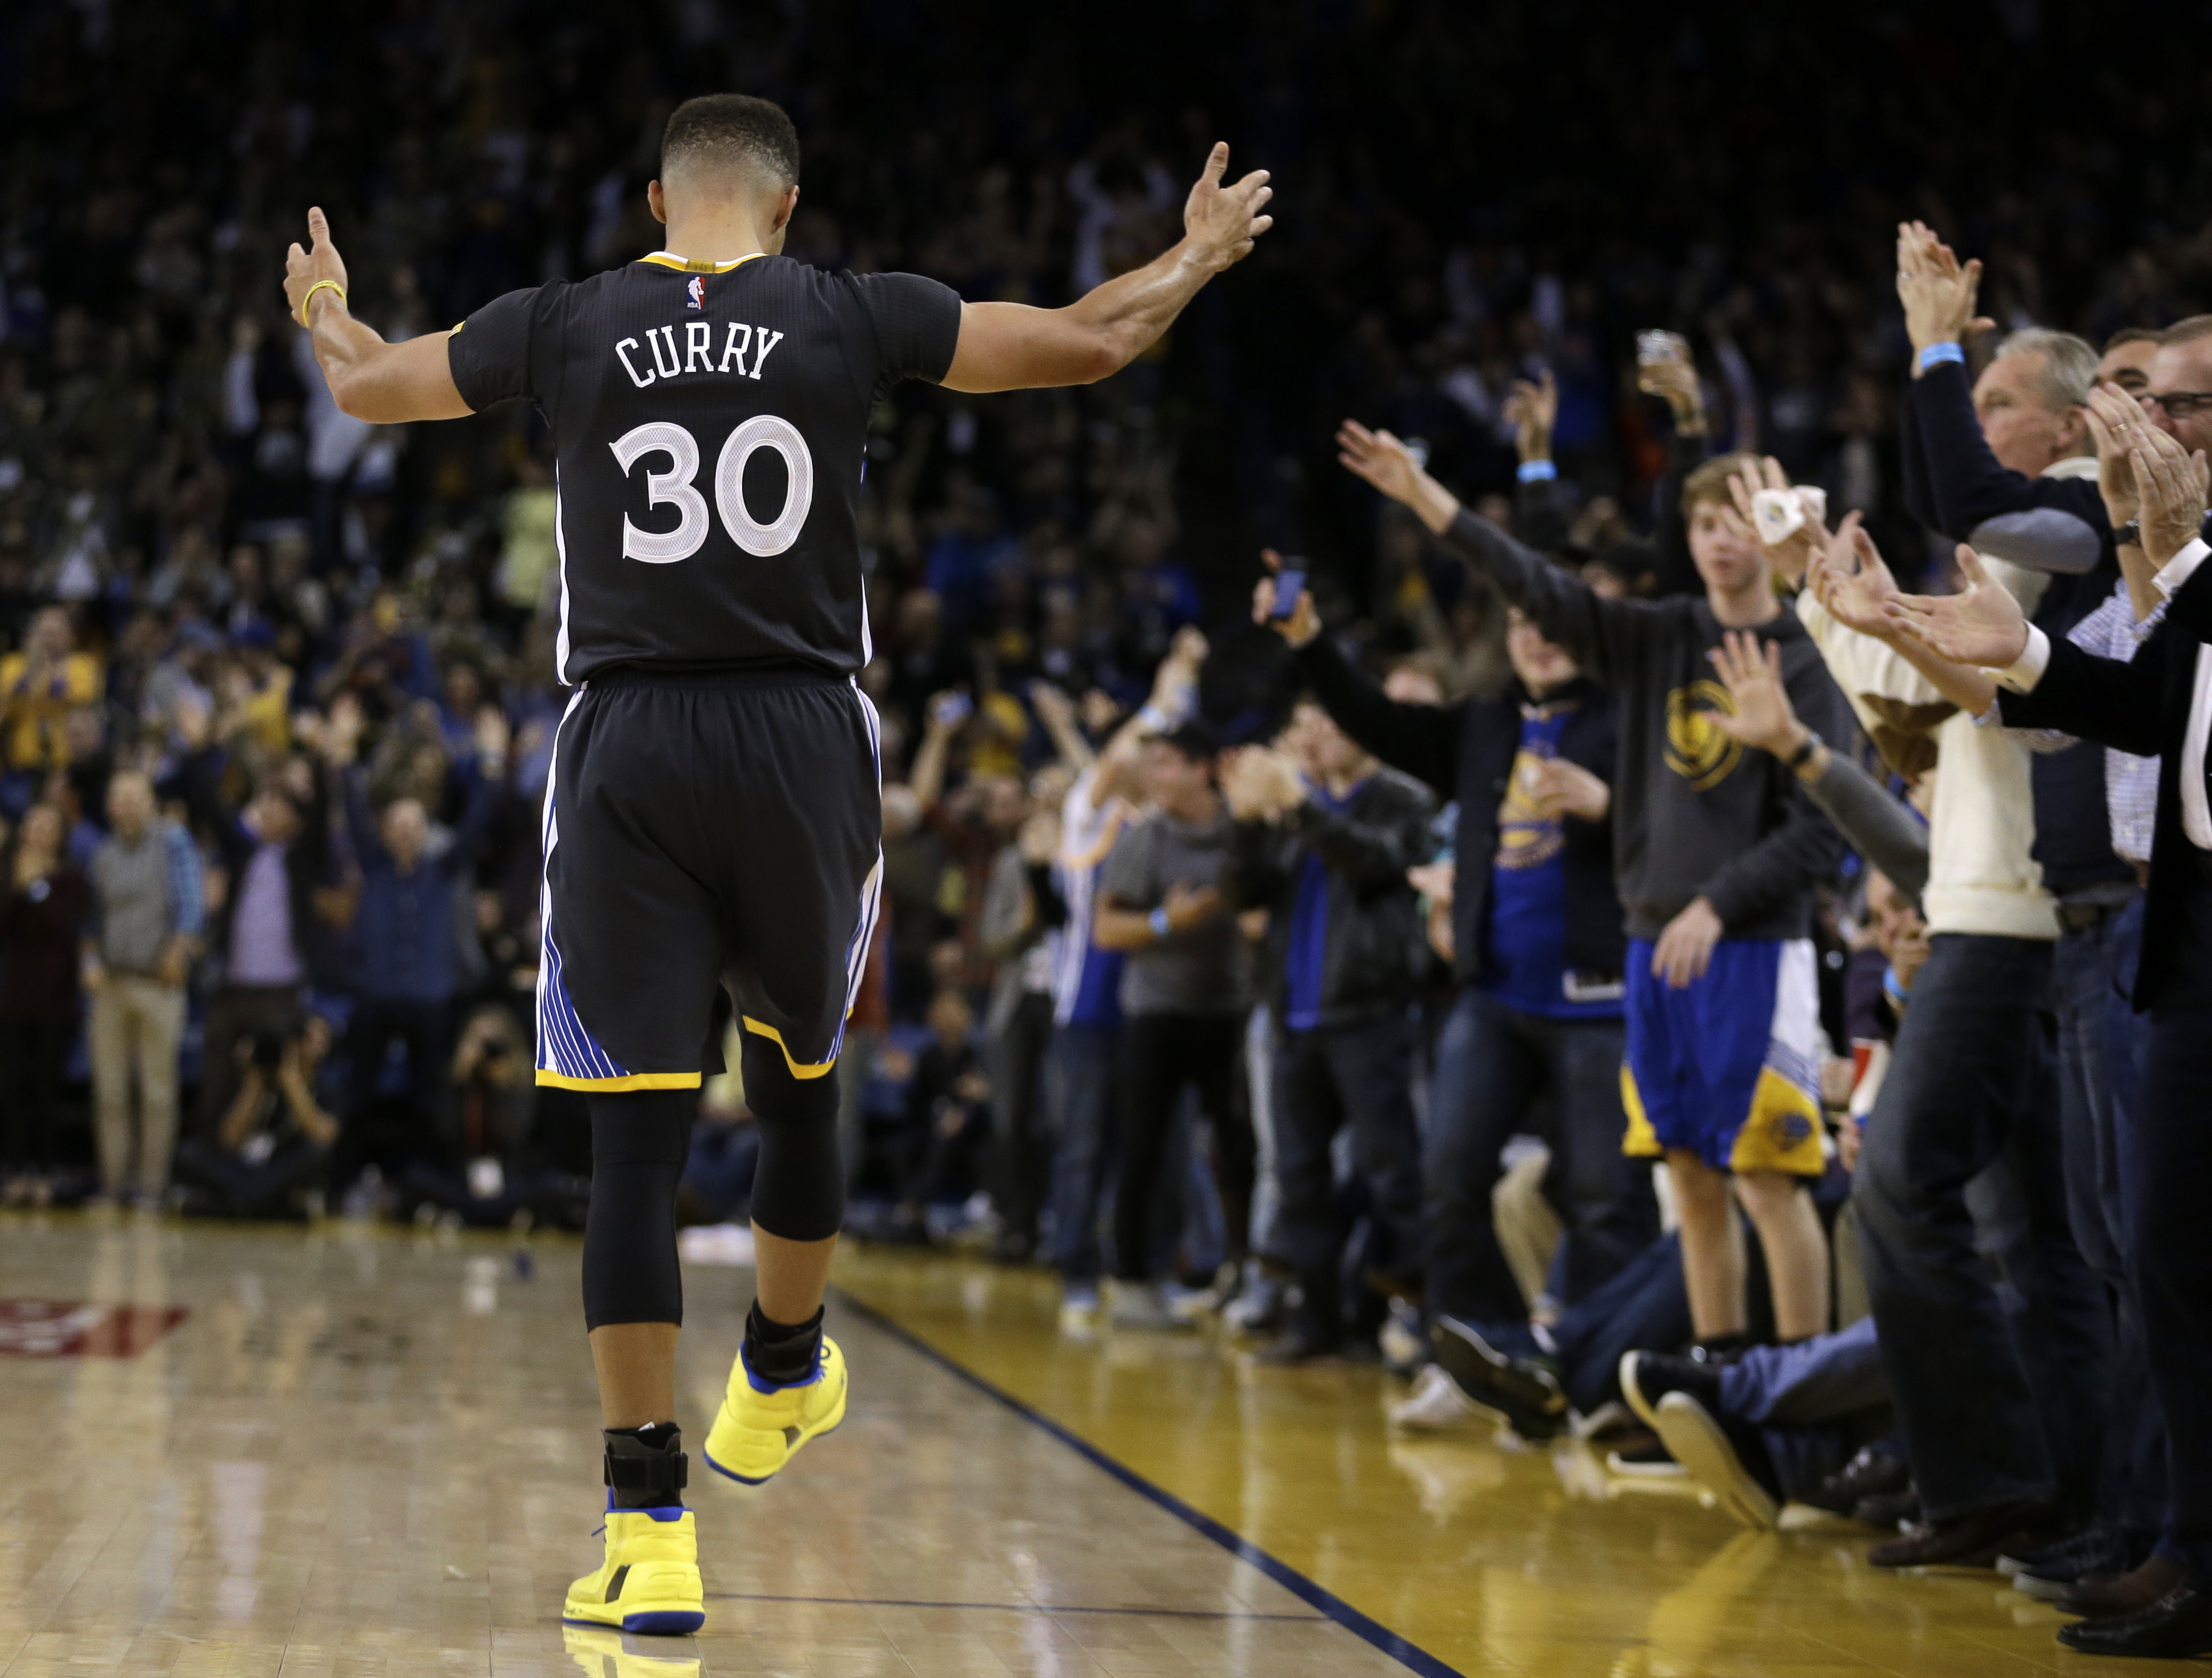 Golden State Warriors' Stephen Curry (30) gestures as fans cheer a score against the Phoenix Suns during the second half of an NBA basketball game Saturday, Dec. 3, 2016, in Oakland, Calif. (AP Photo/Ben Margot)